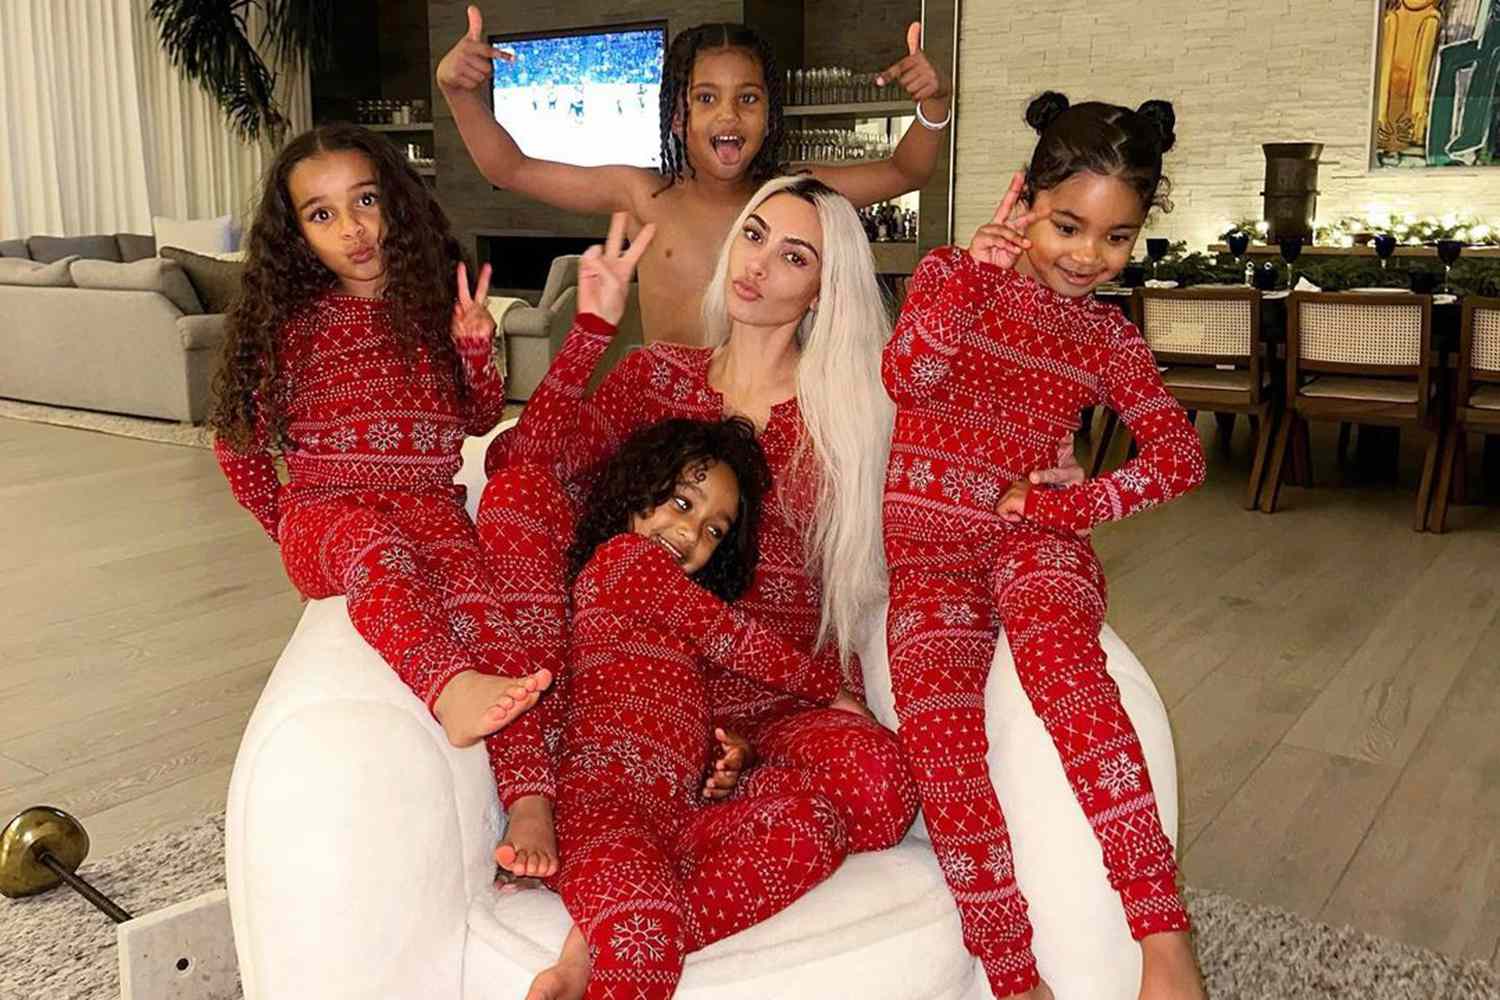 Kim Kardashian Shares Playful Photos with Saint and Chicago, and Nieces Dream and True